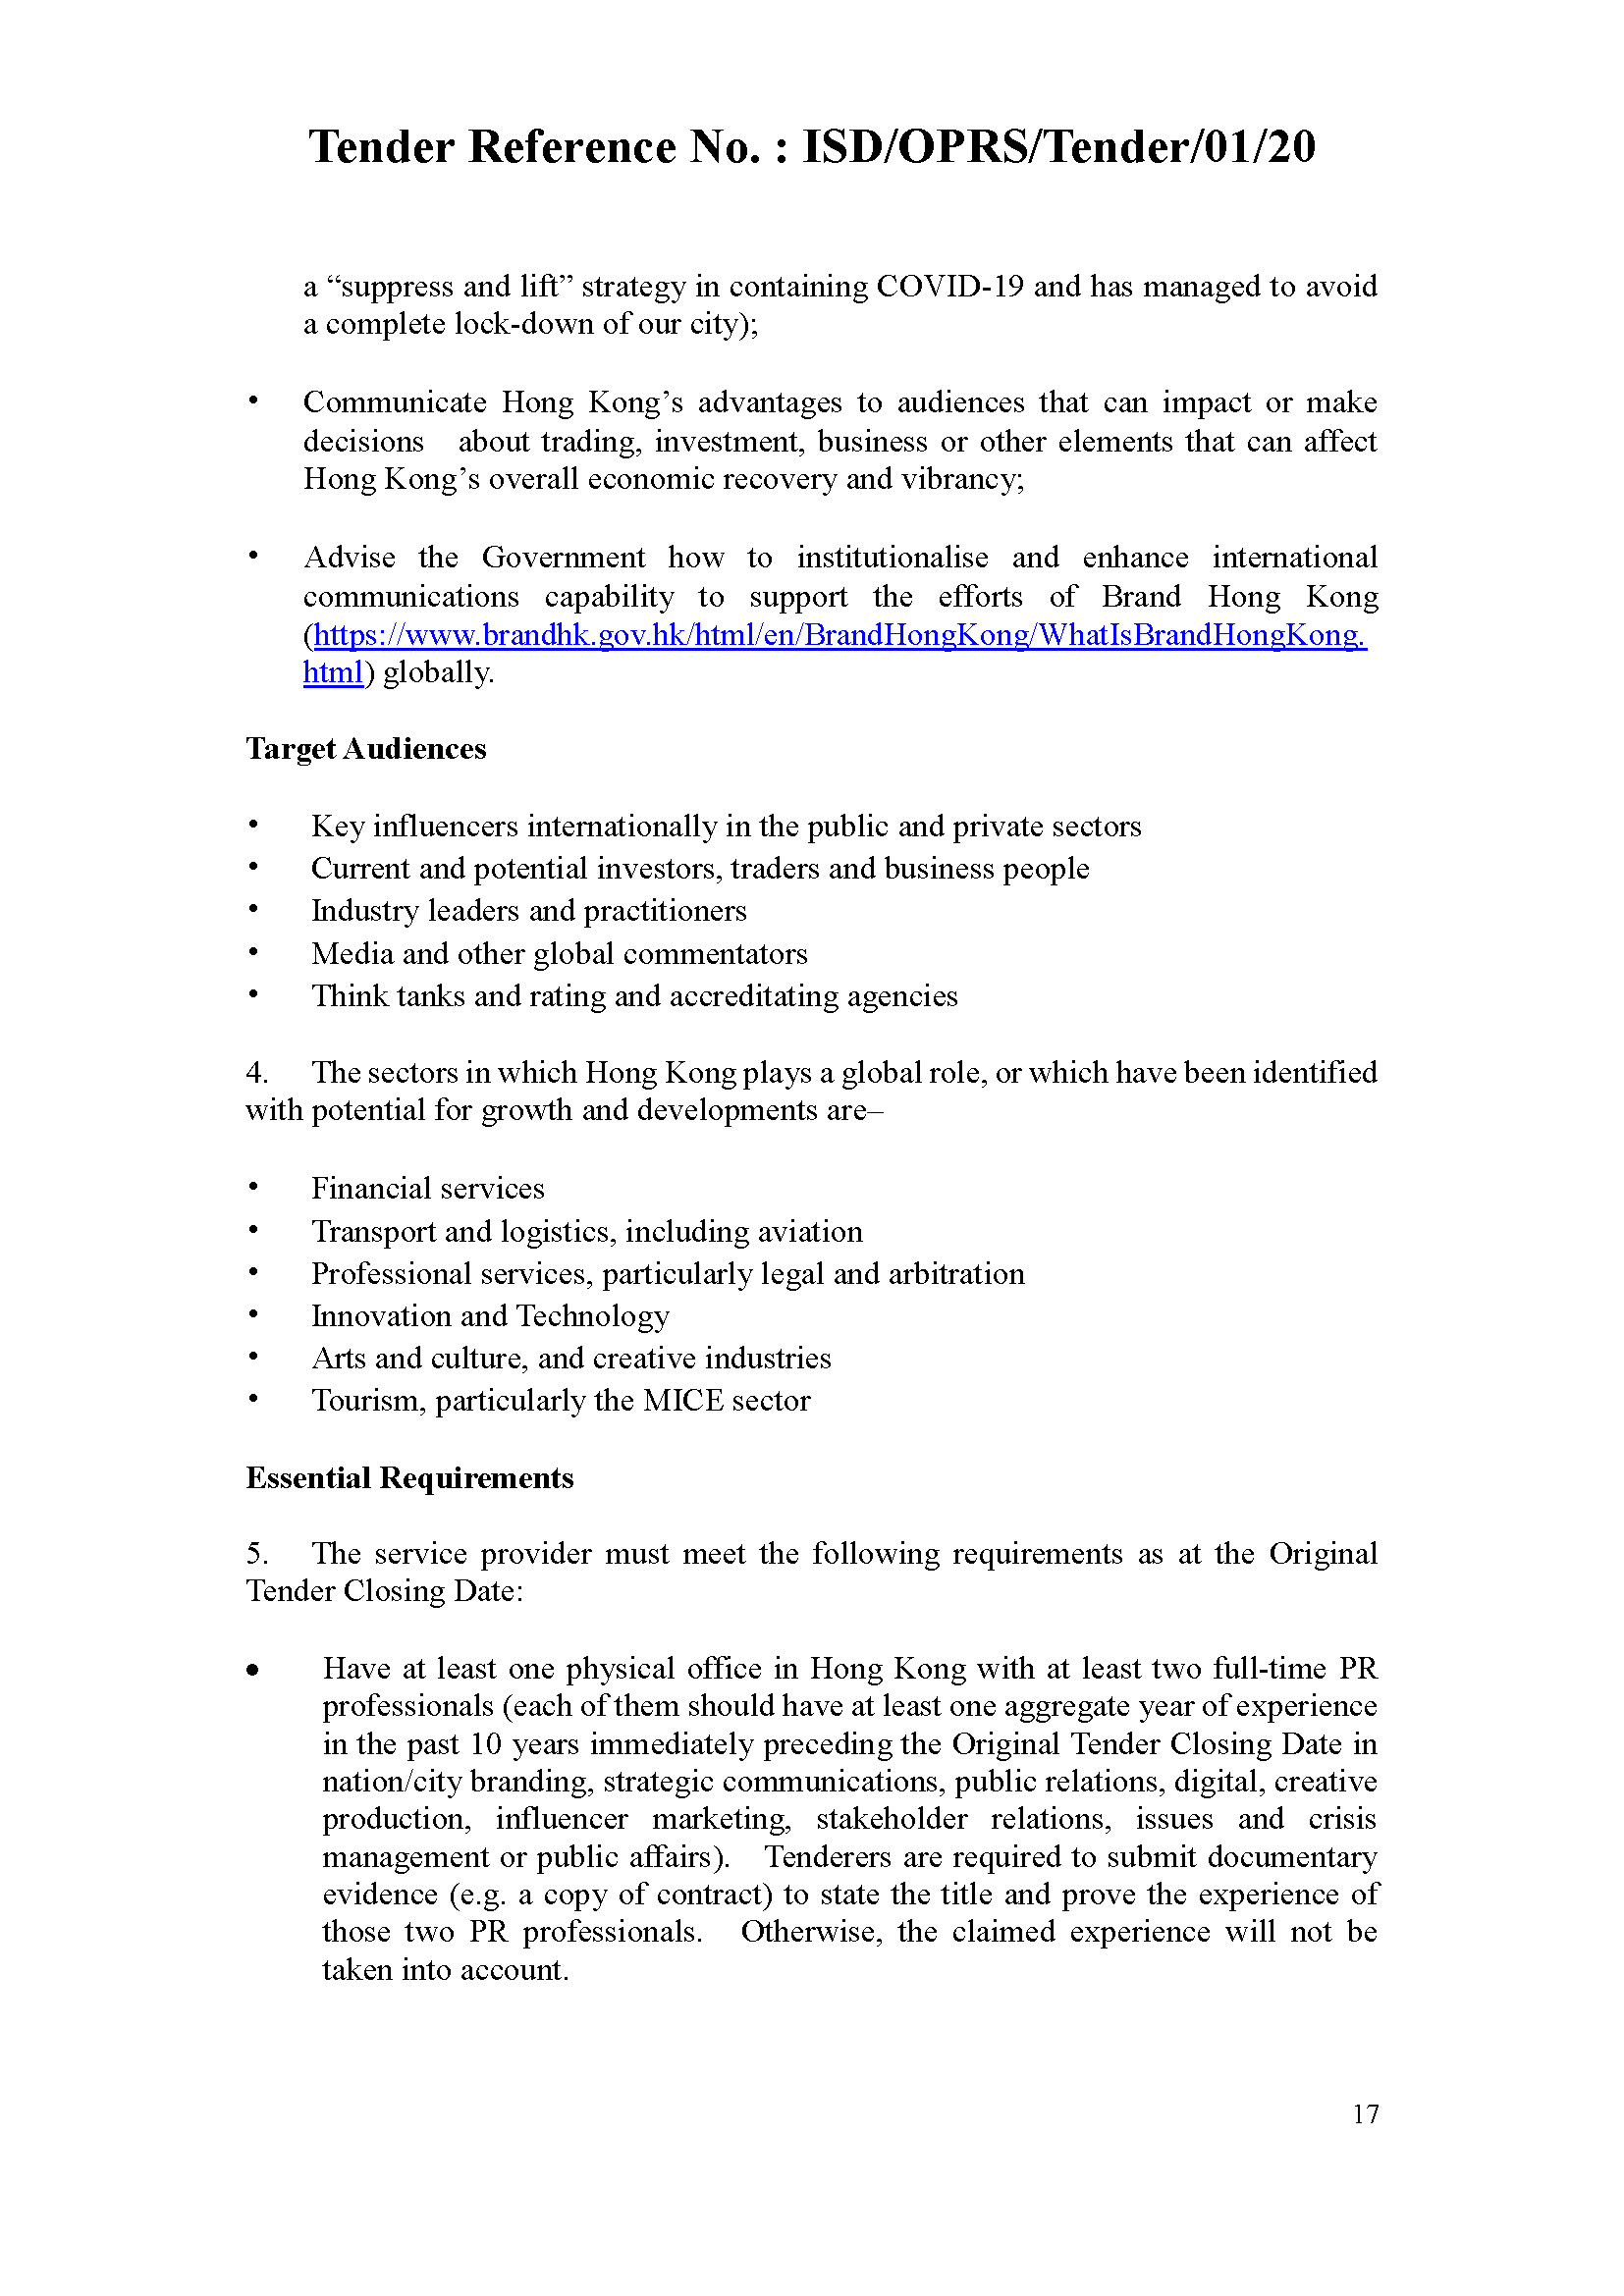 Tender document - Relaunch Hong Kong_Page_17